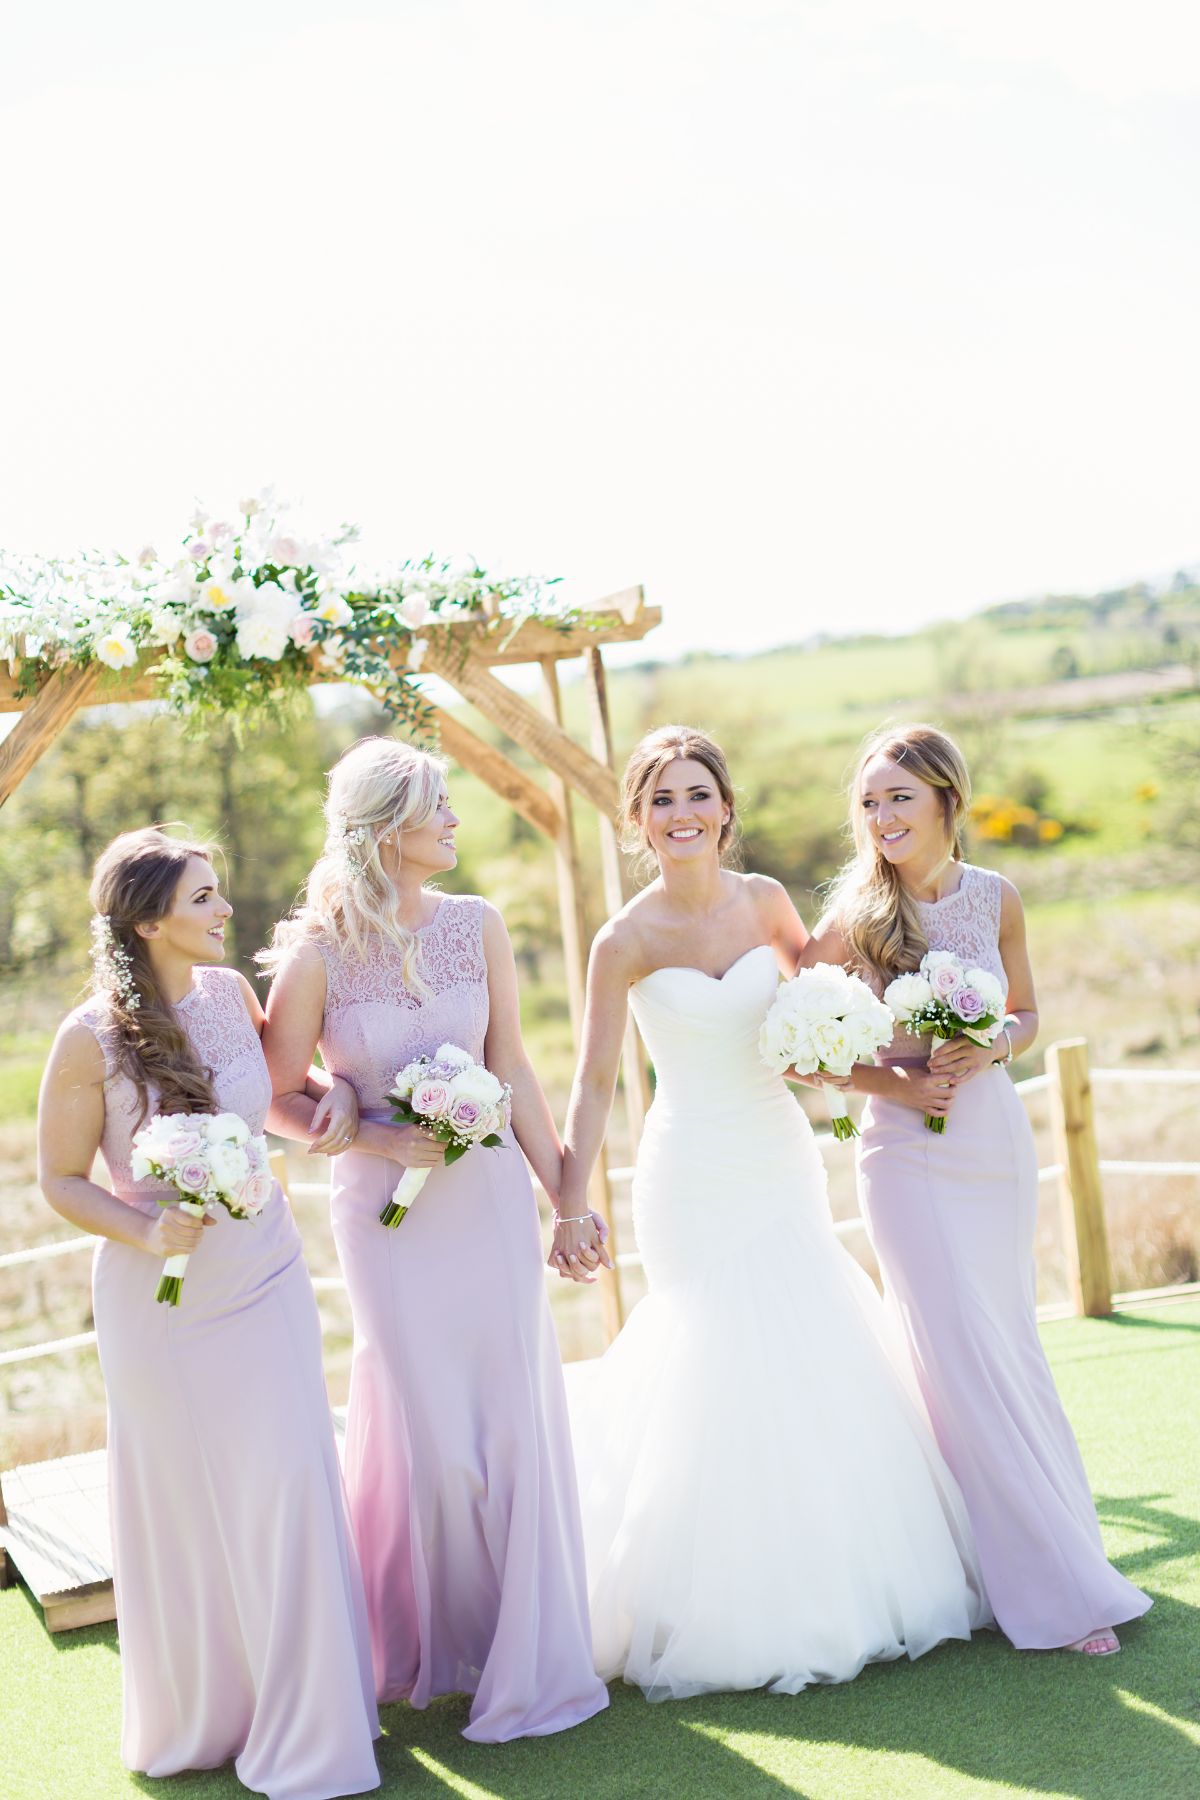 Bethany and her Bridesmaids sharing a moment